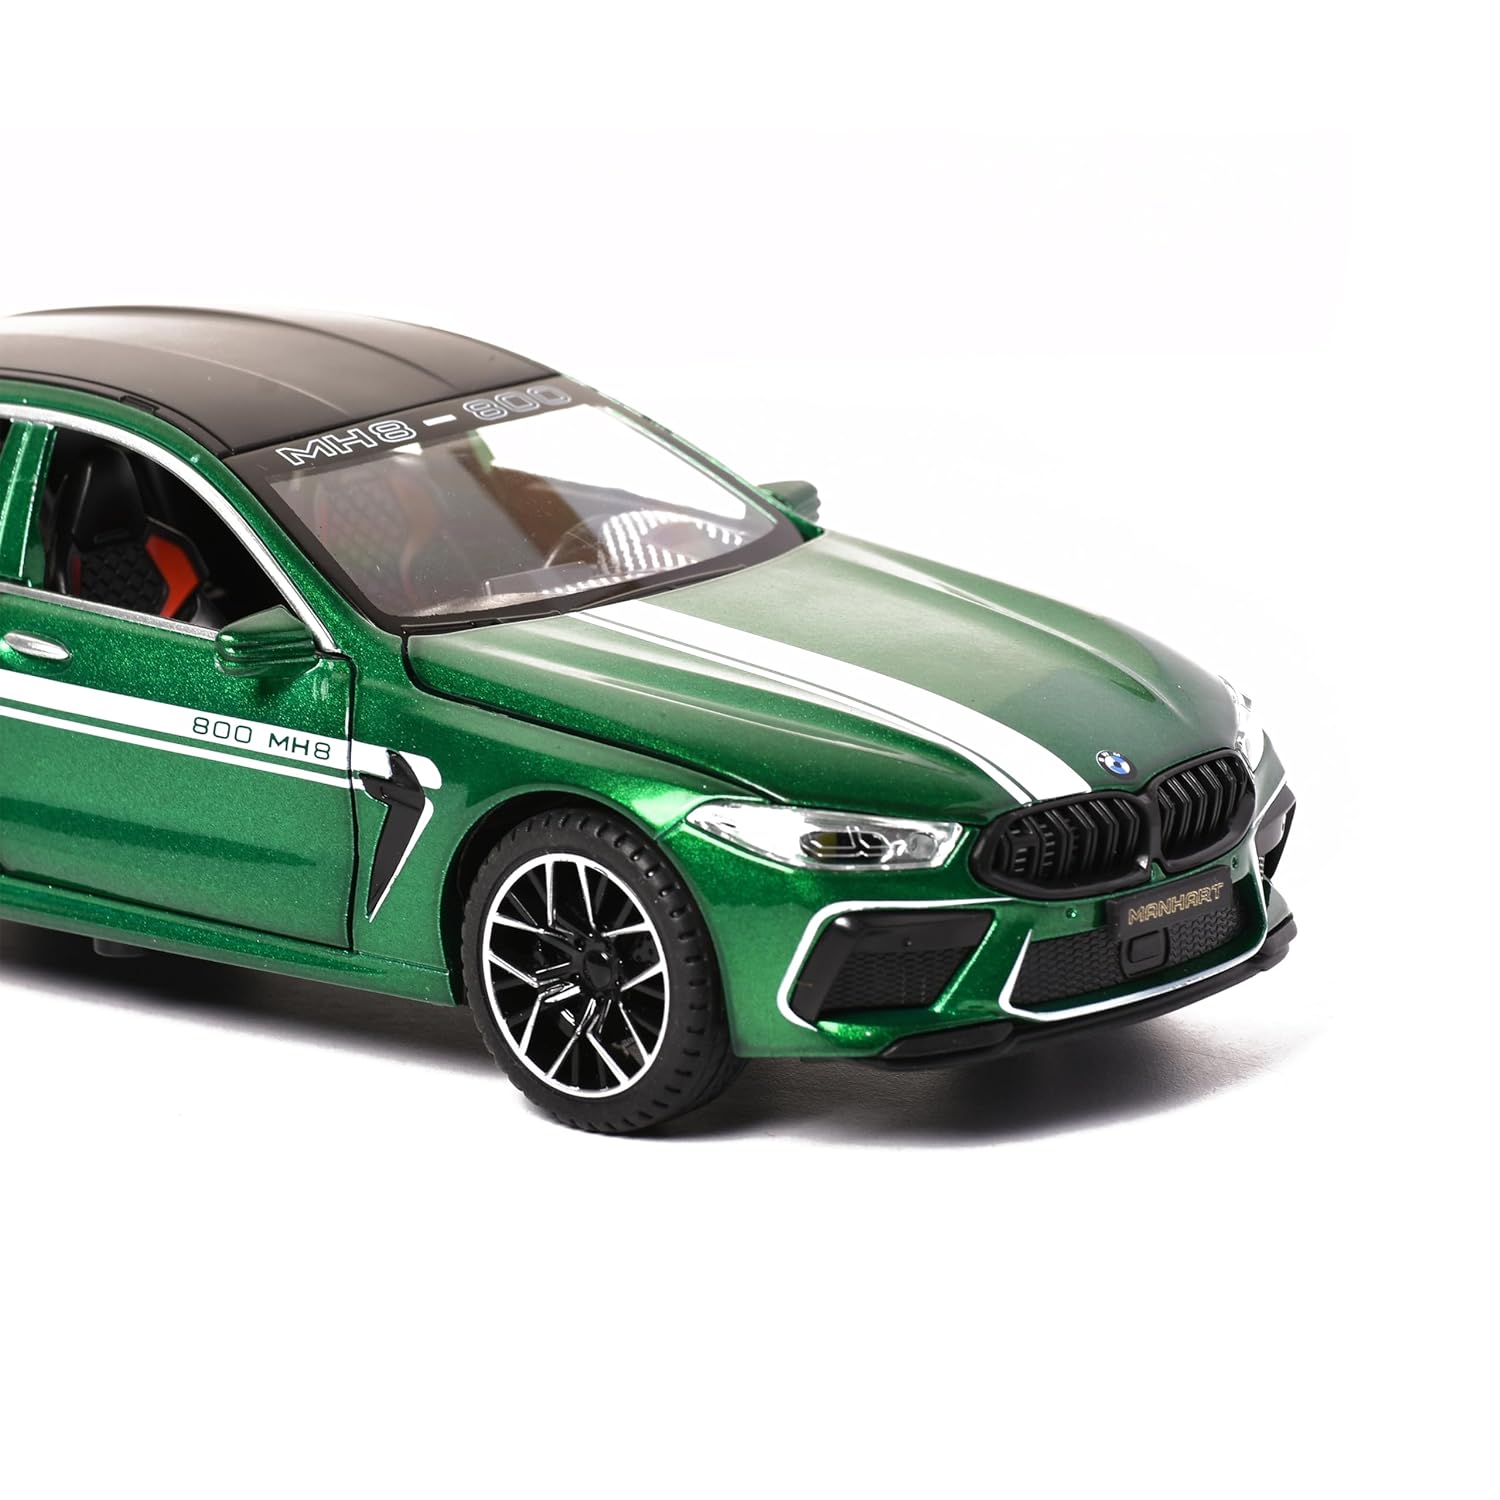 Braintastic Model Diecast Car Toy Vehicle Pull Back Friction Car with Openable Doors Light & Music Toys for Kids Age 3+ Years (BMW Green)